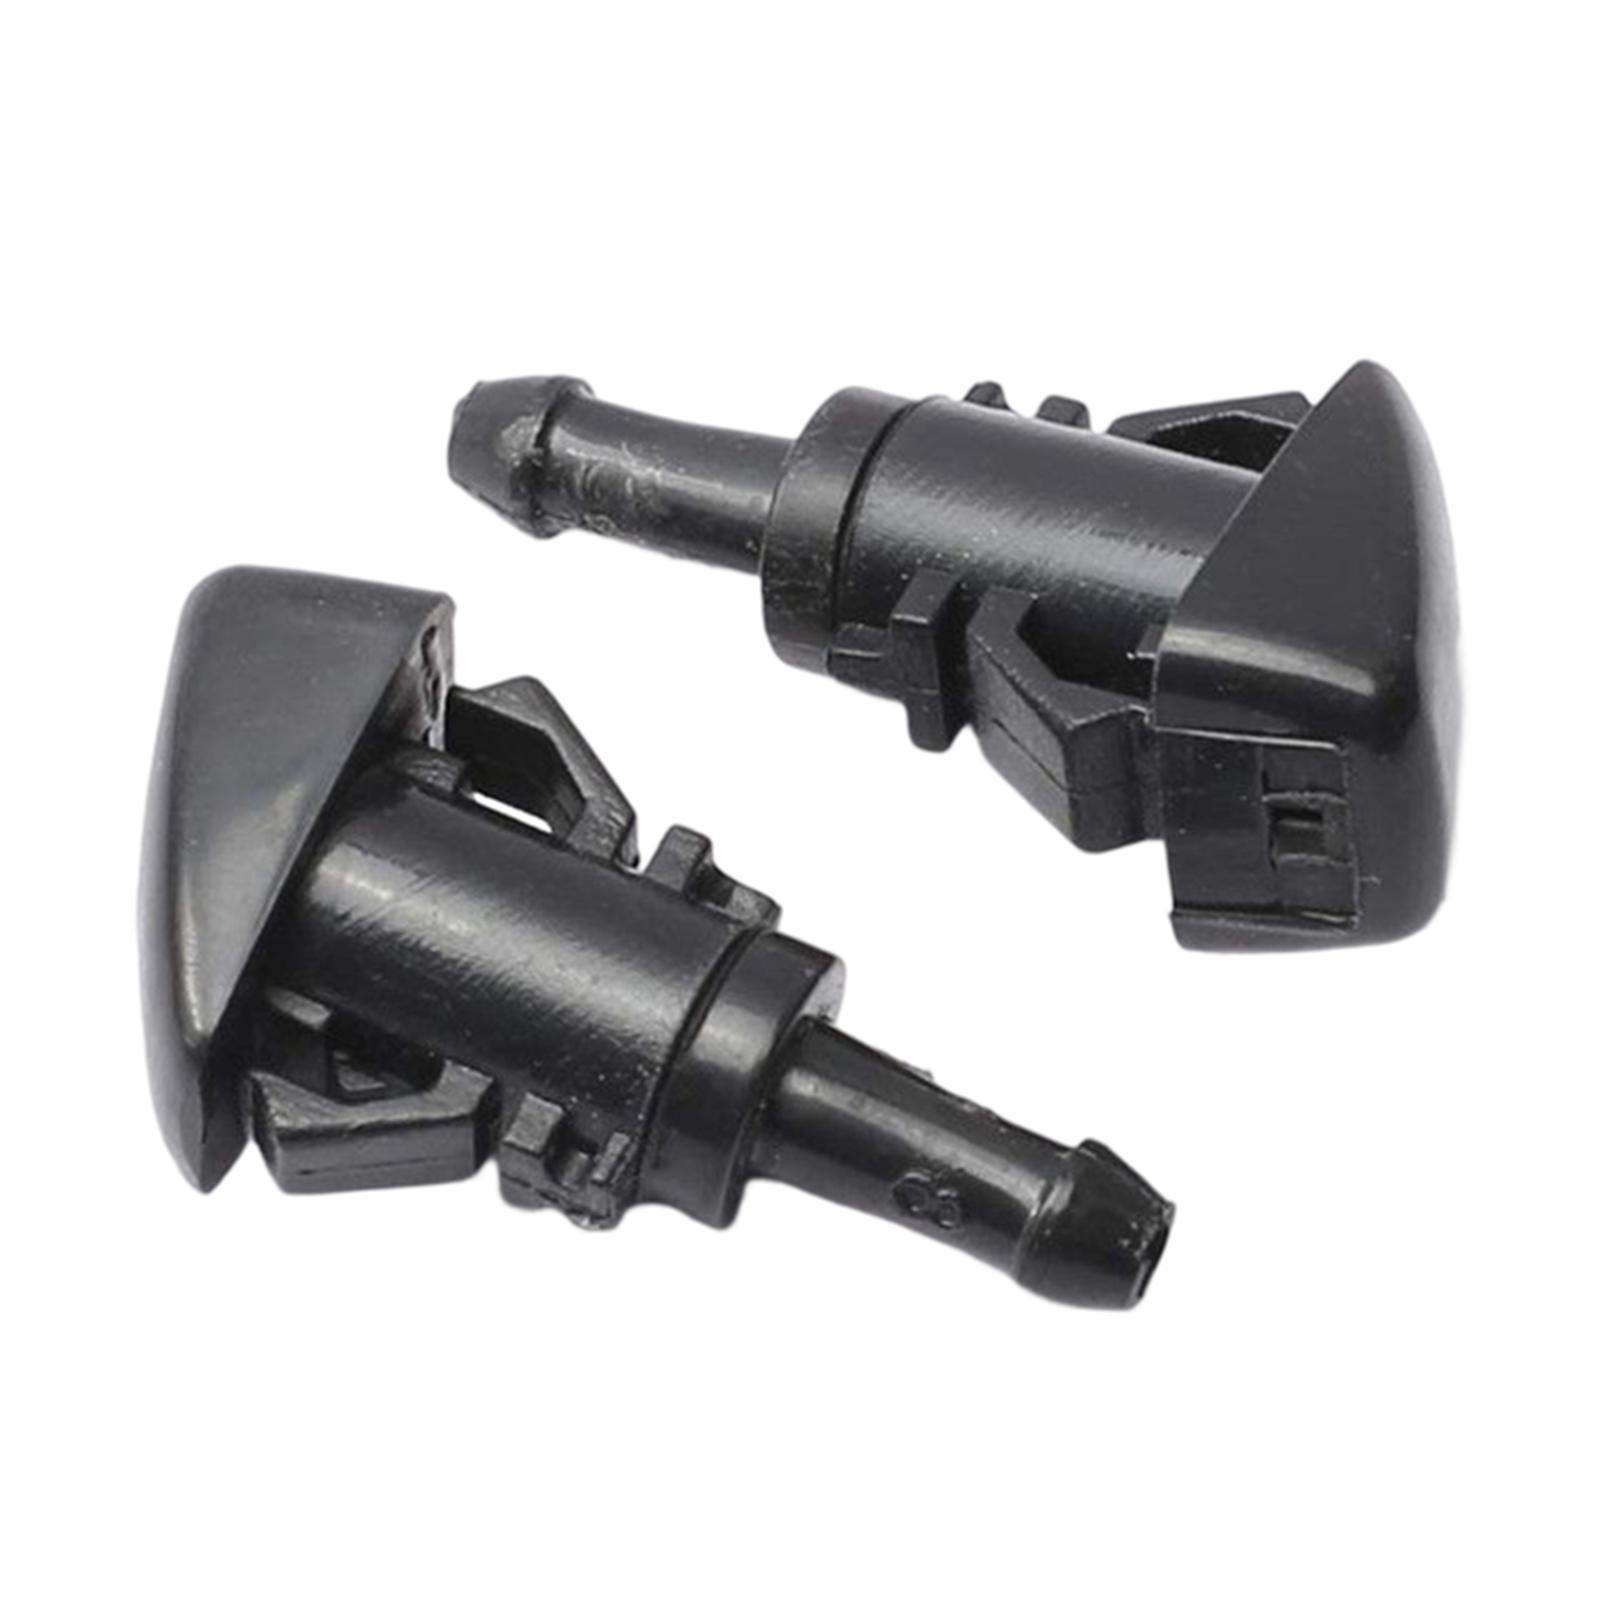 2Pcs Vehicle Windshield Washer Nozzle for   Accessories